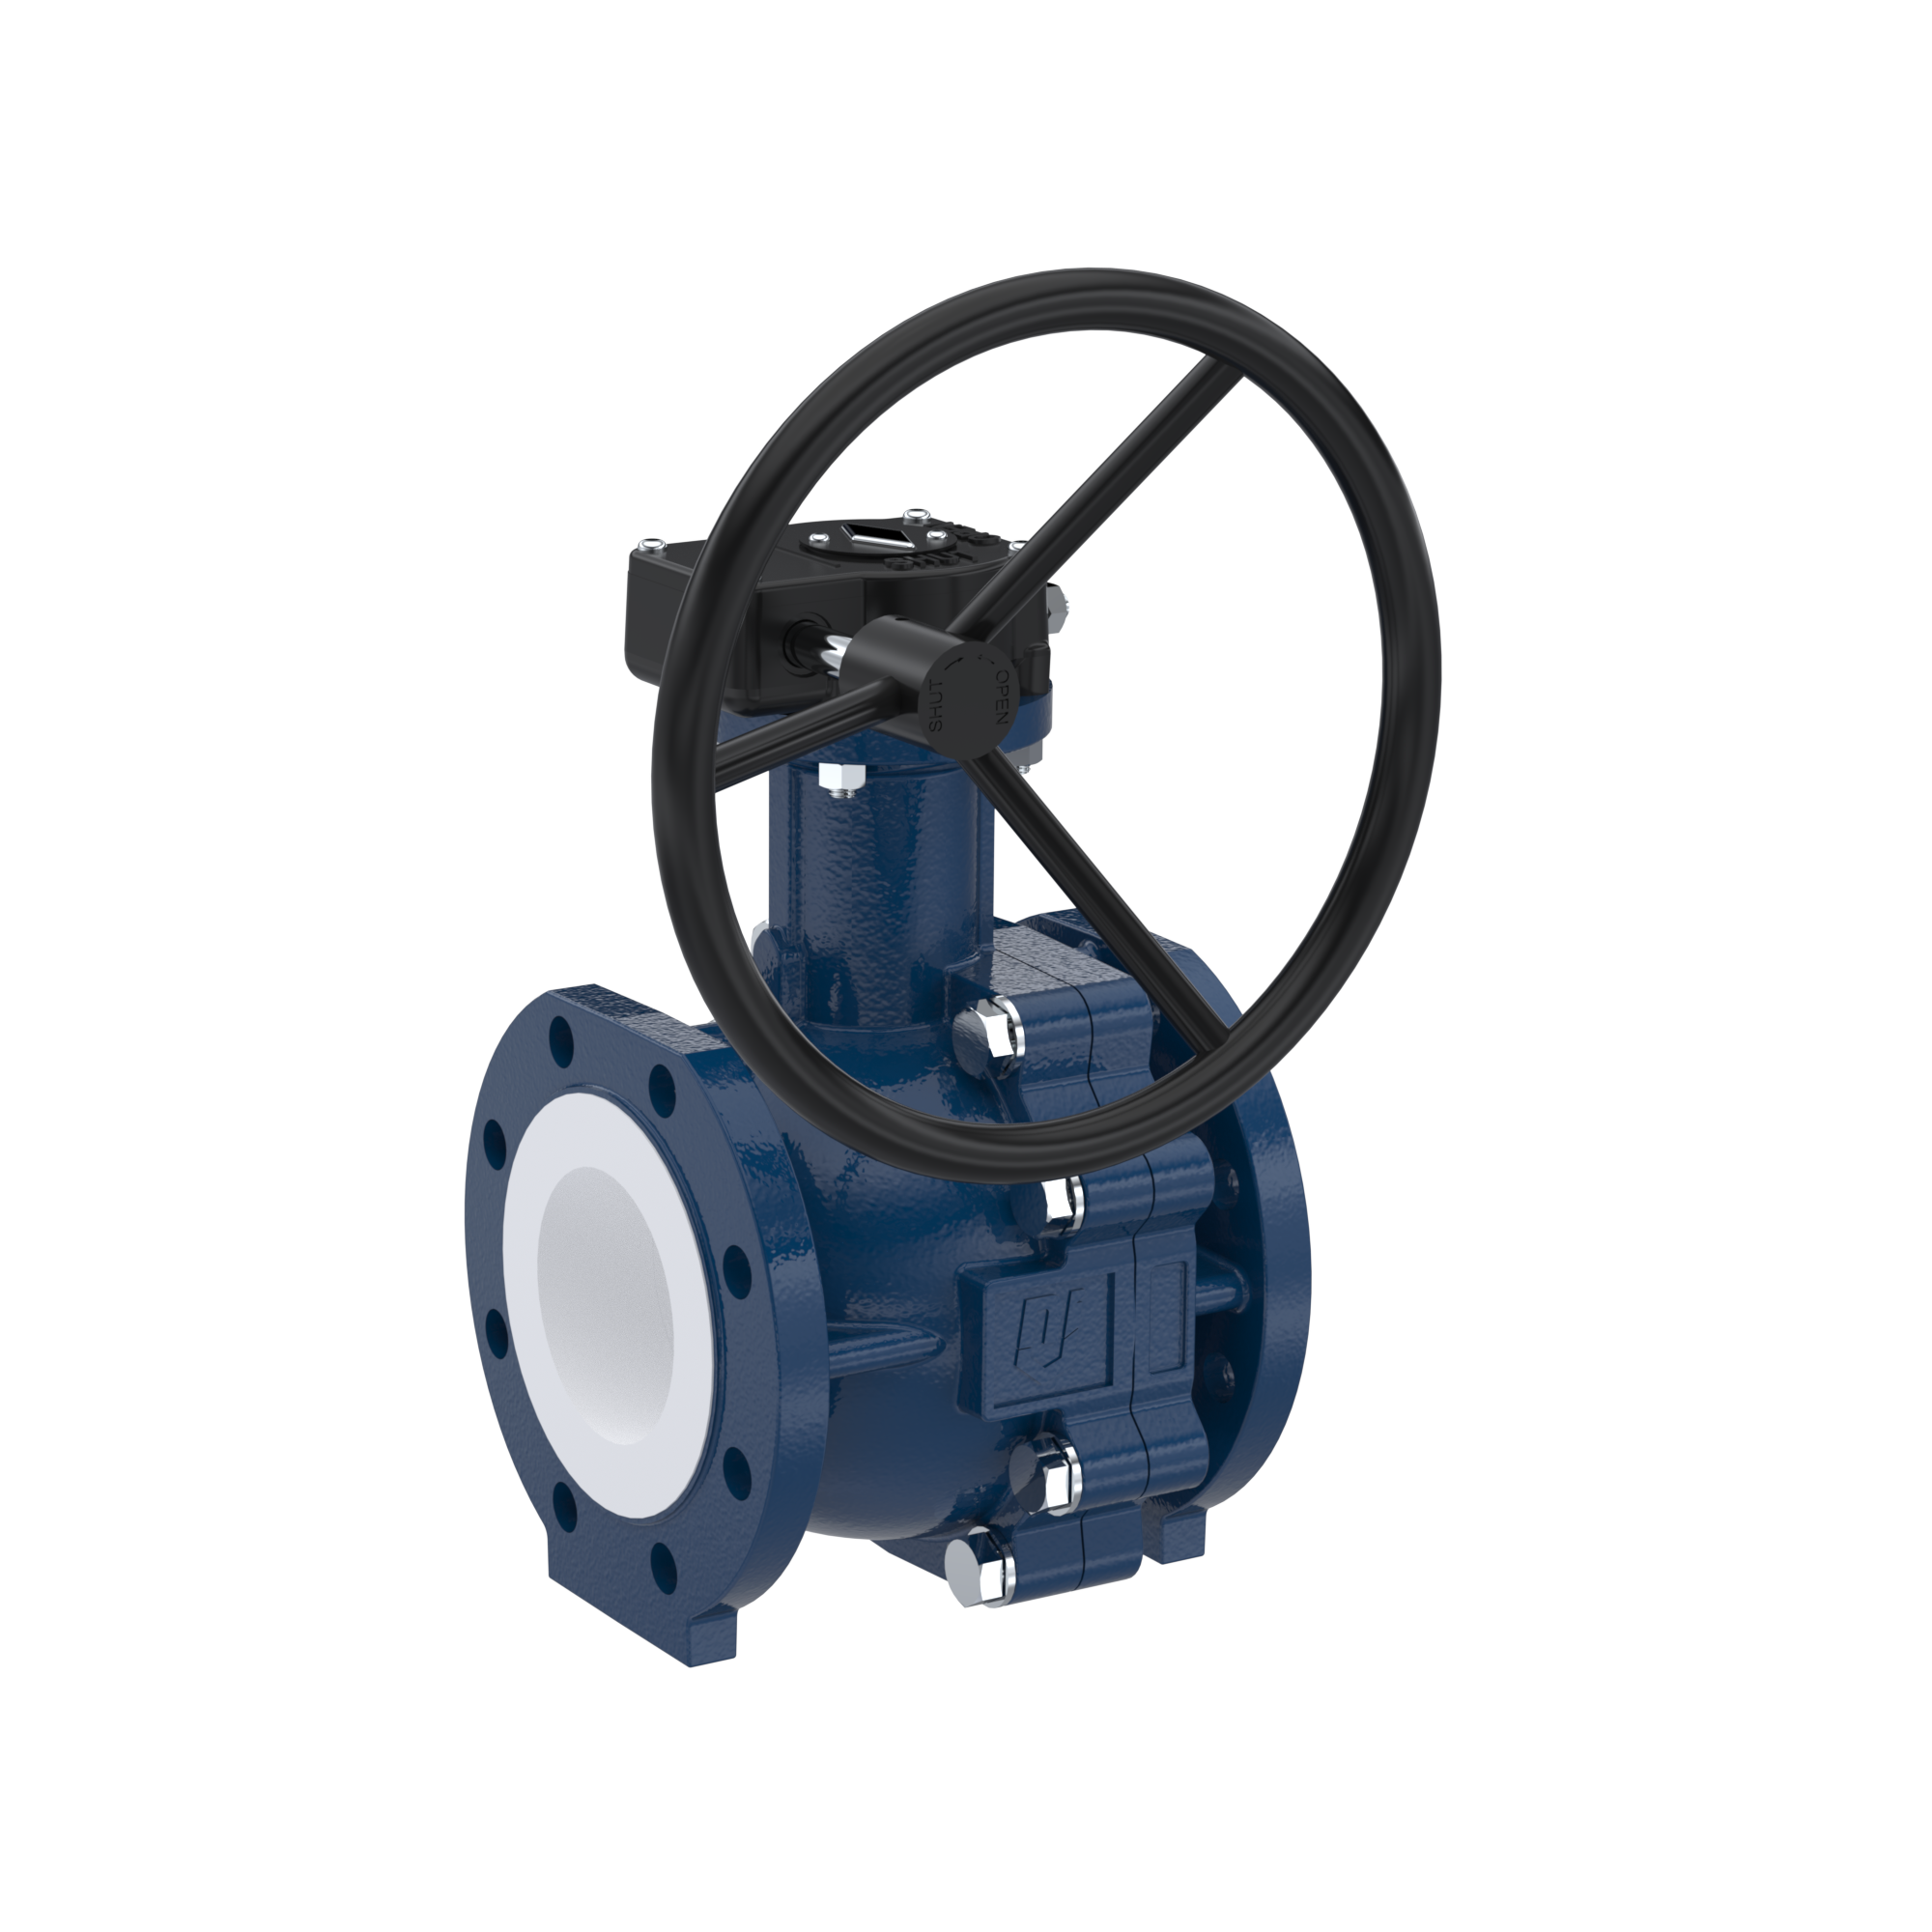 PFA-flange ball valve FK13 DN150 - 6" inch ANSI 150 made of spheroidal graphite cast iron with worm gear